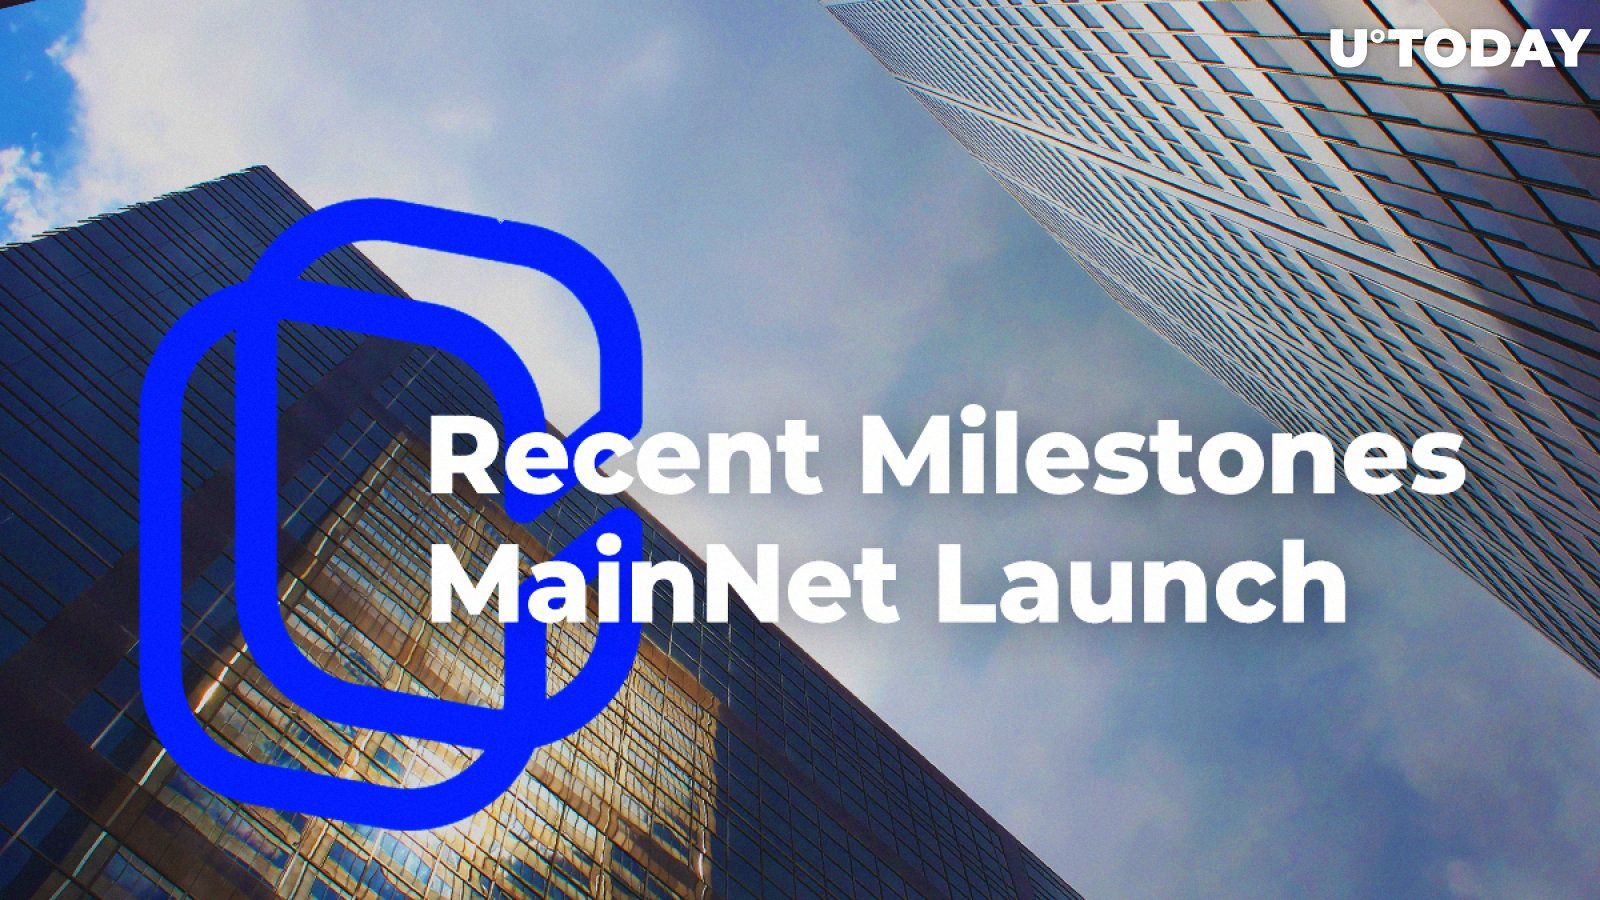 CENNZ Boasts Recent Milestones, Targets MainNet Launch Later This Year